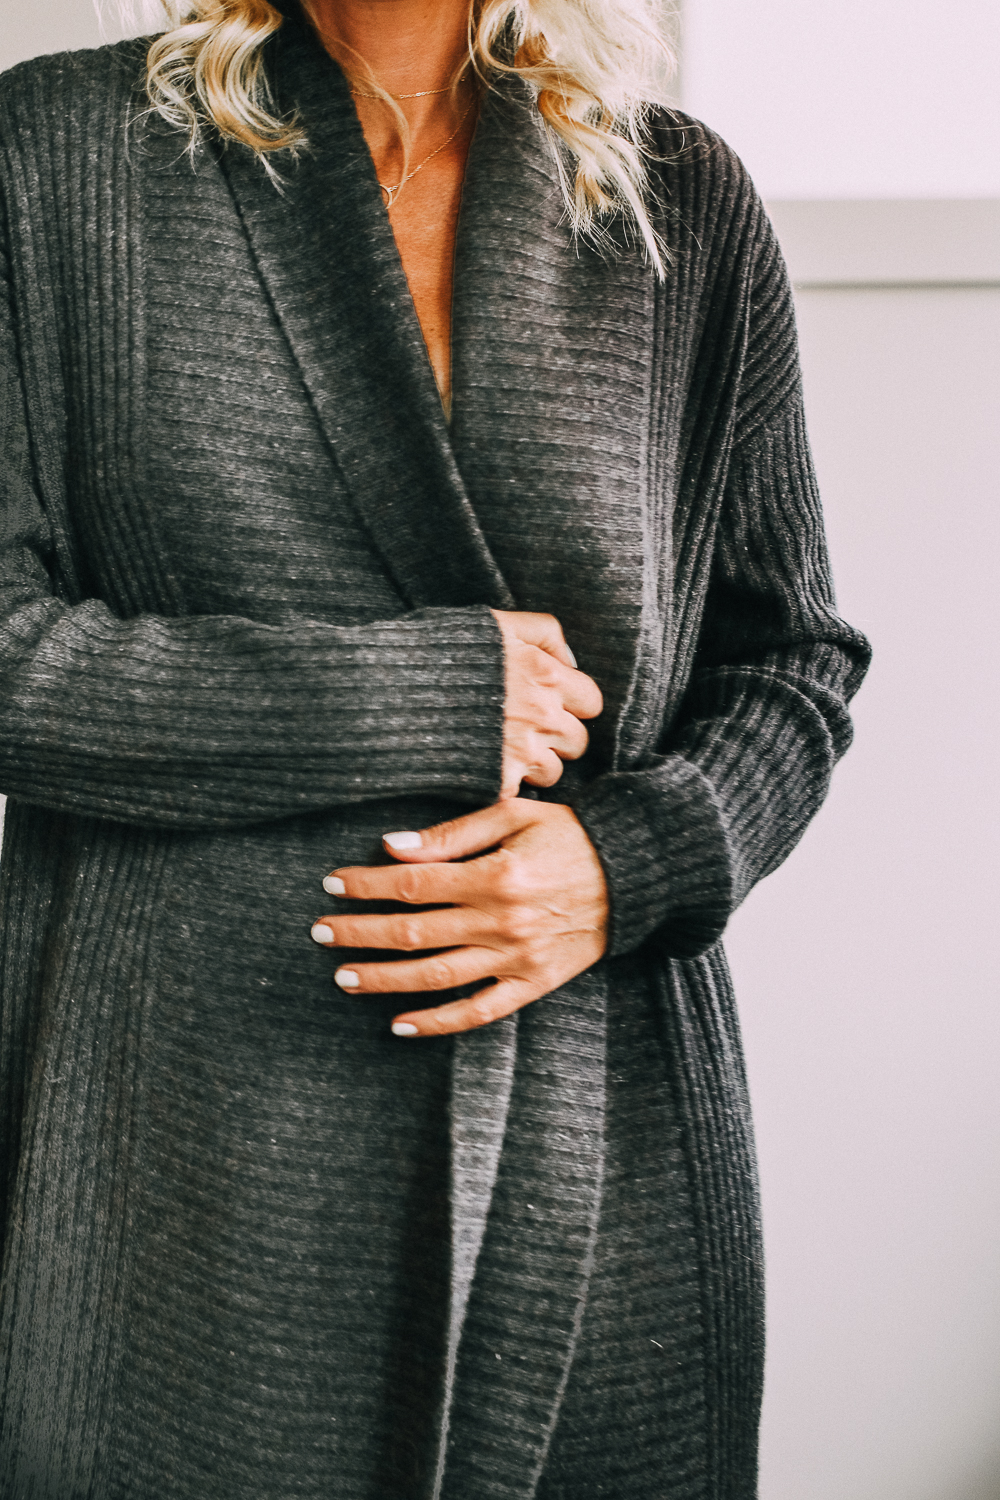 Nordstrom Anniversary Sale Still in Stock featuring a charcoal gray cashmere cardigan by Halogen